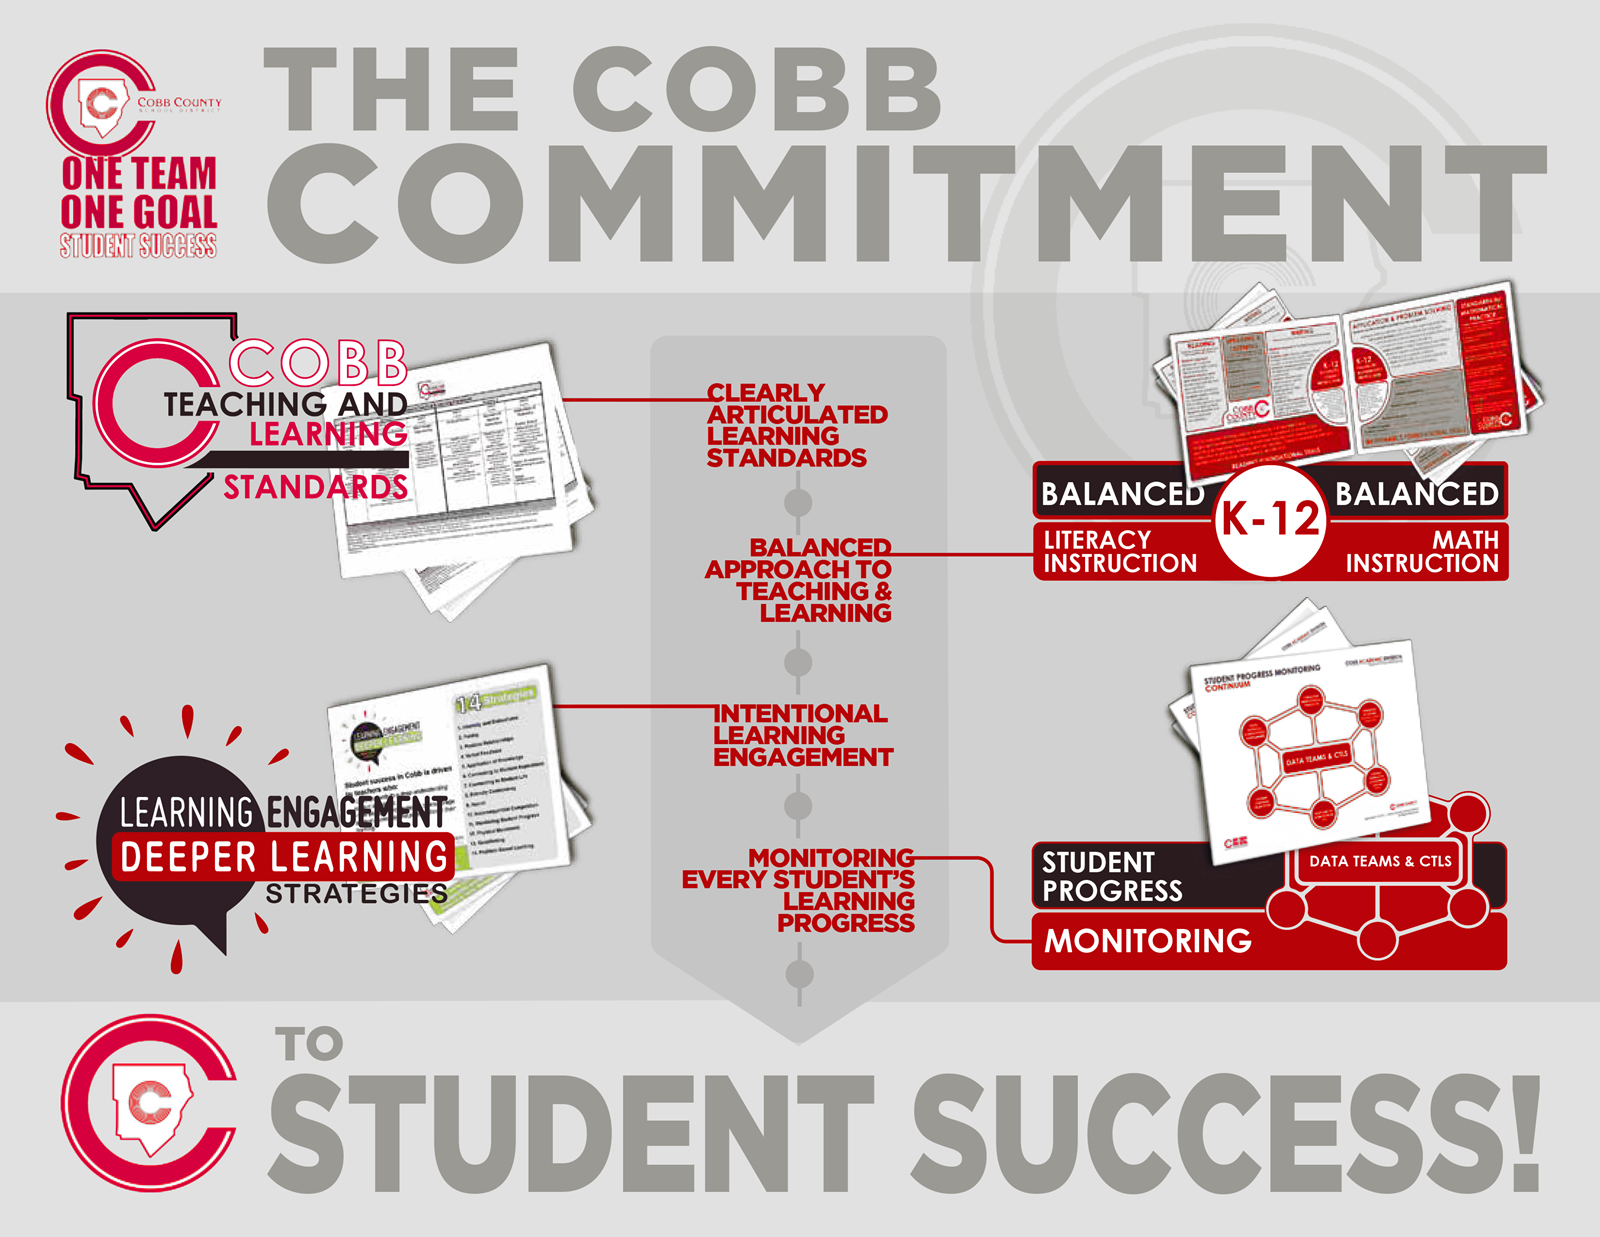 cobbcommitment_infographic_092820.69bf1643638.png